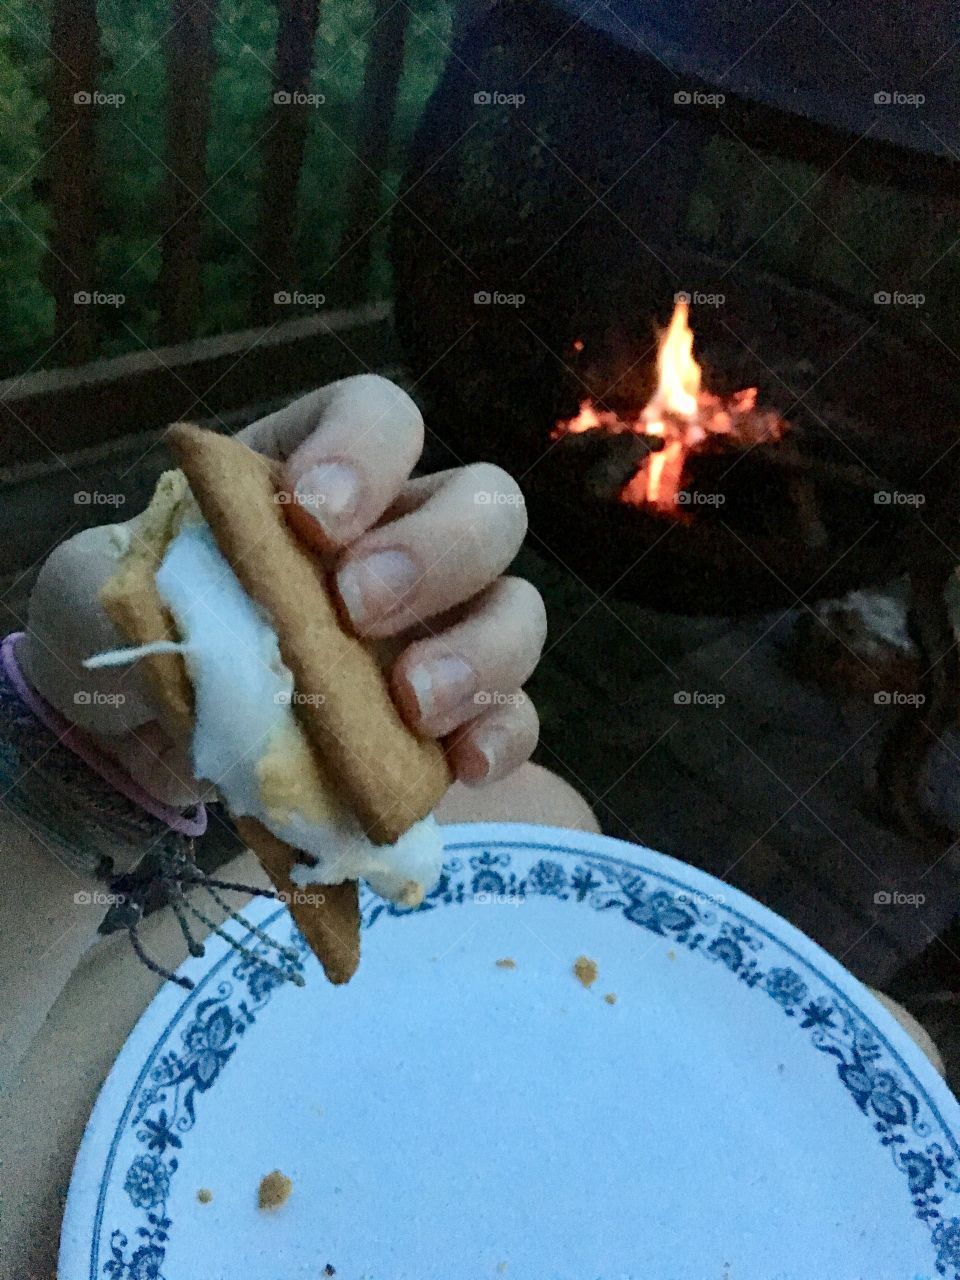 S’mores by the fire